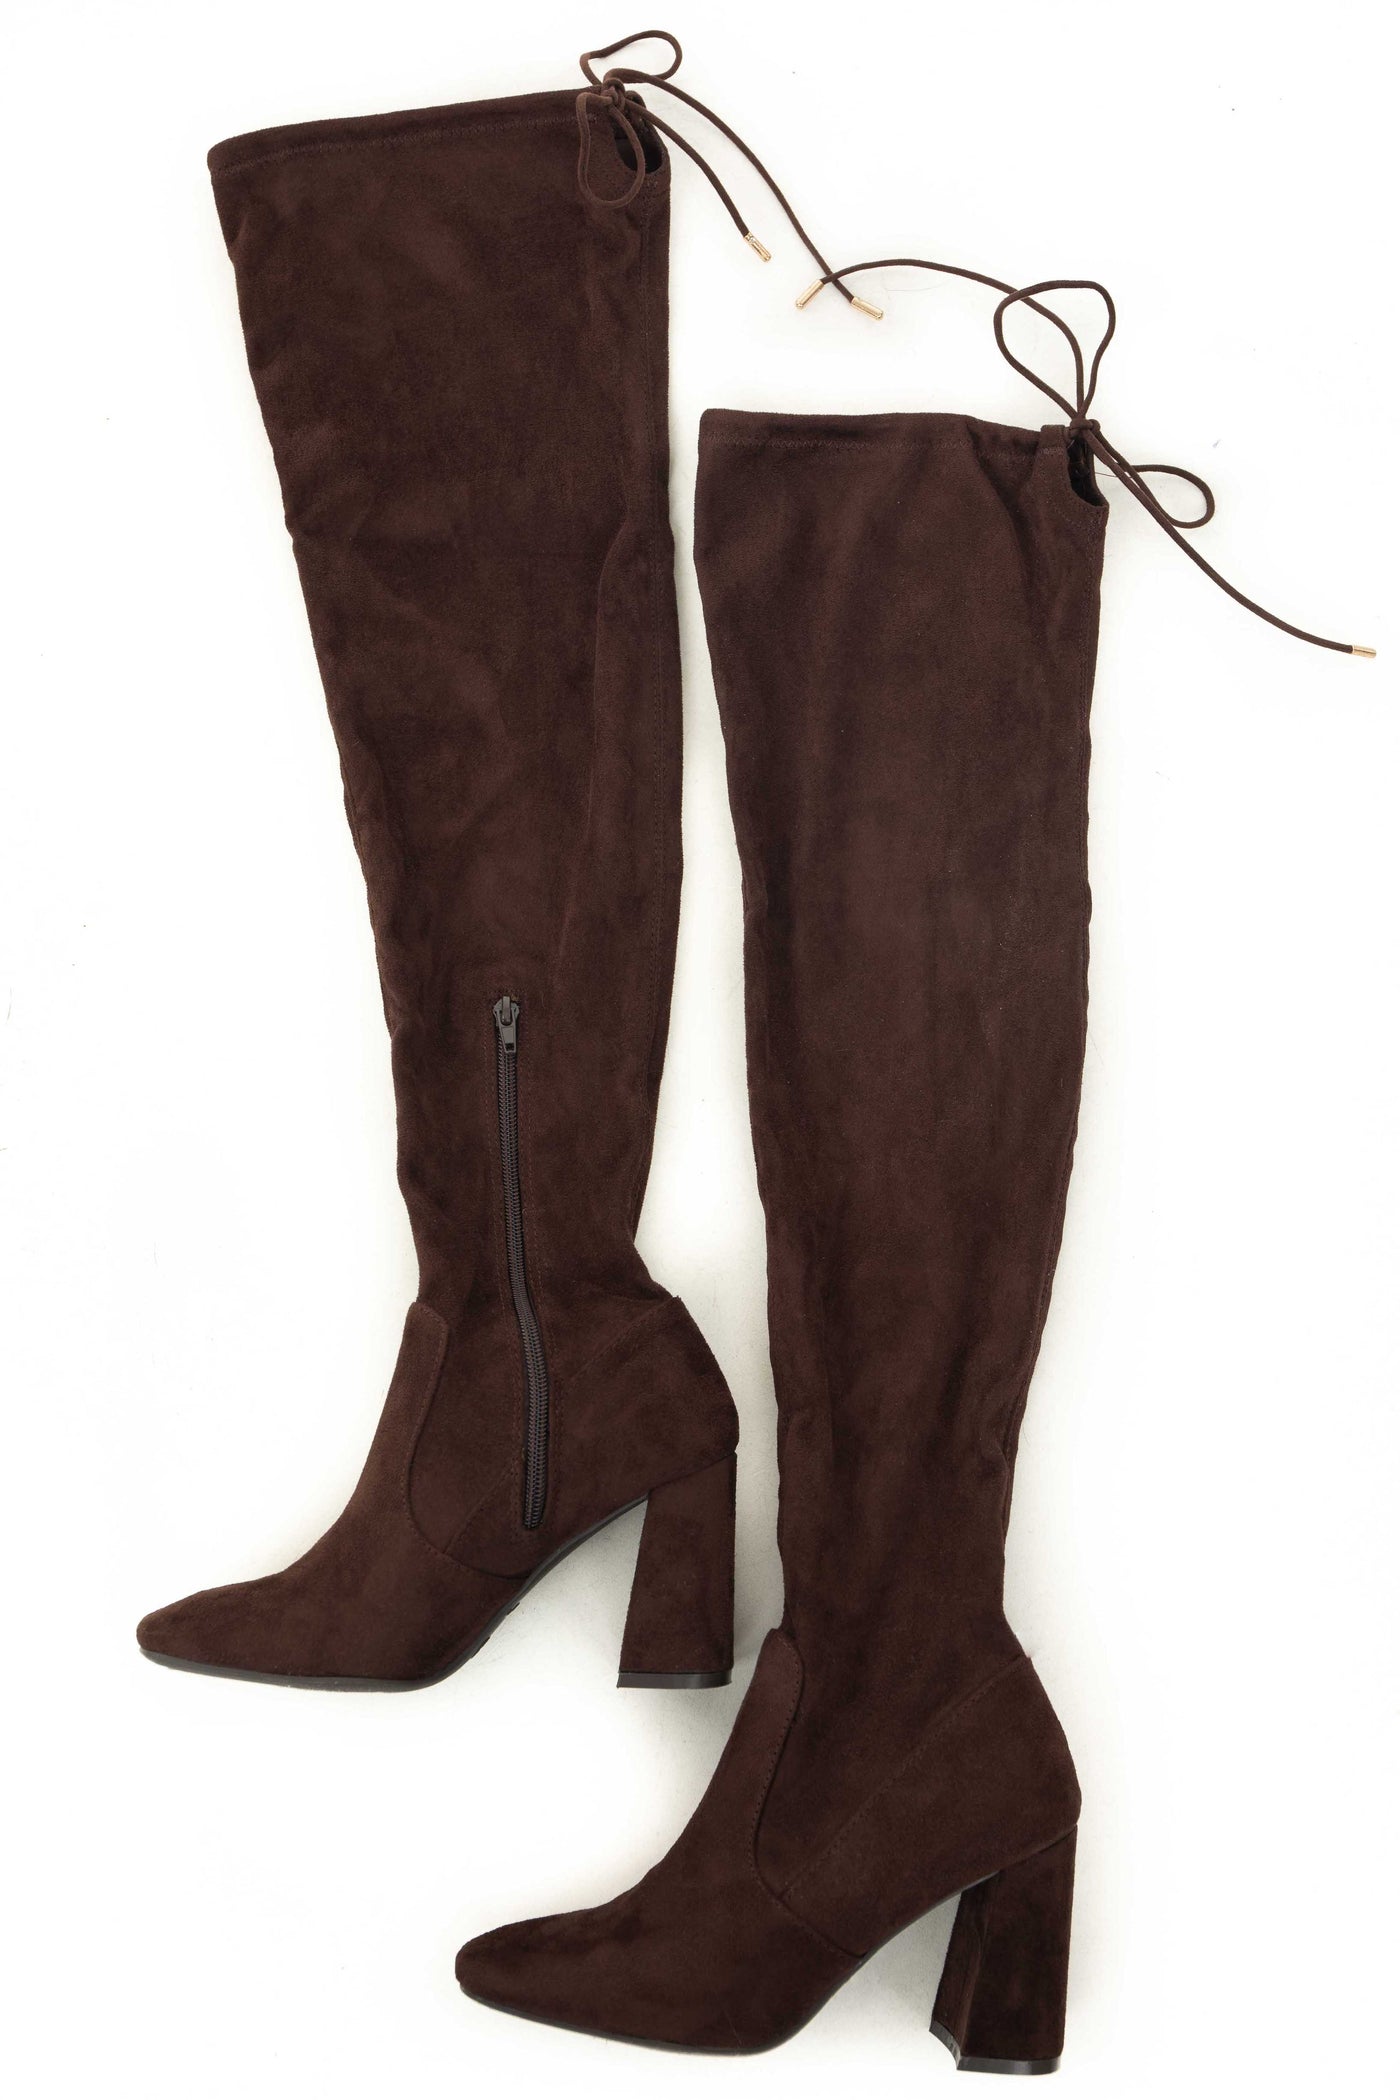 Chocolate Faux Suede Thigh High Boots